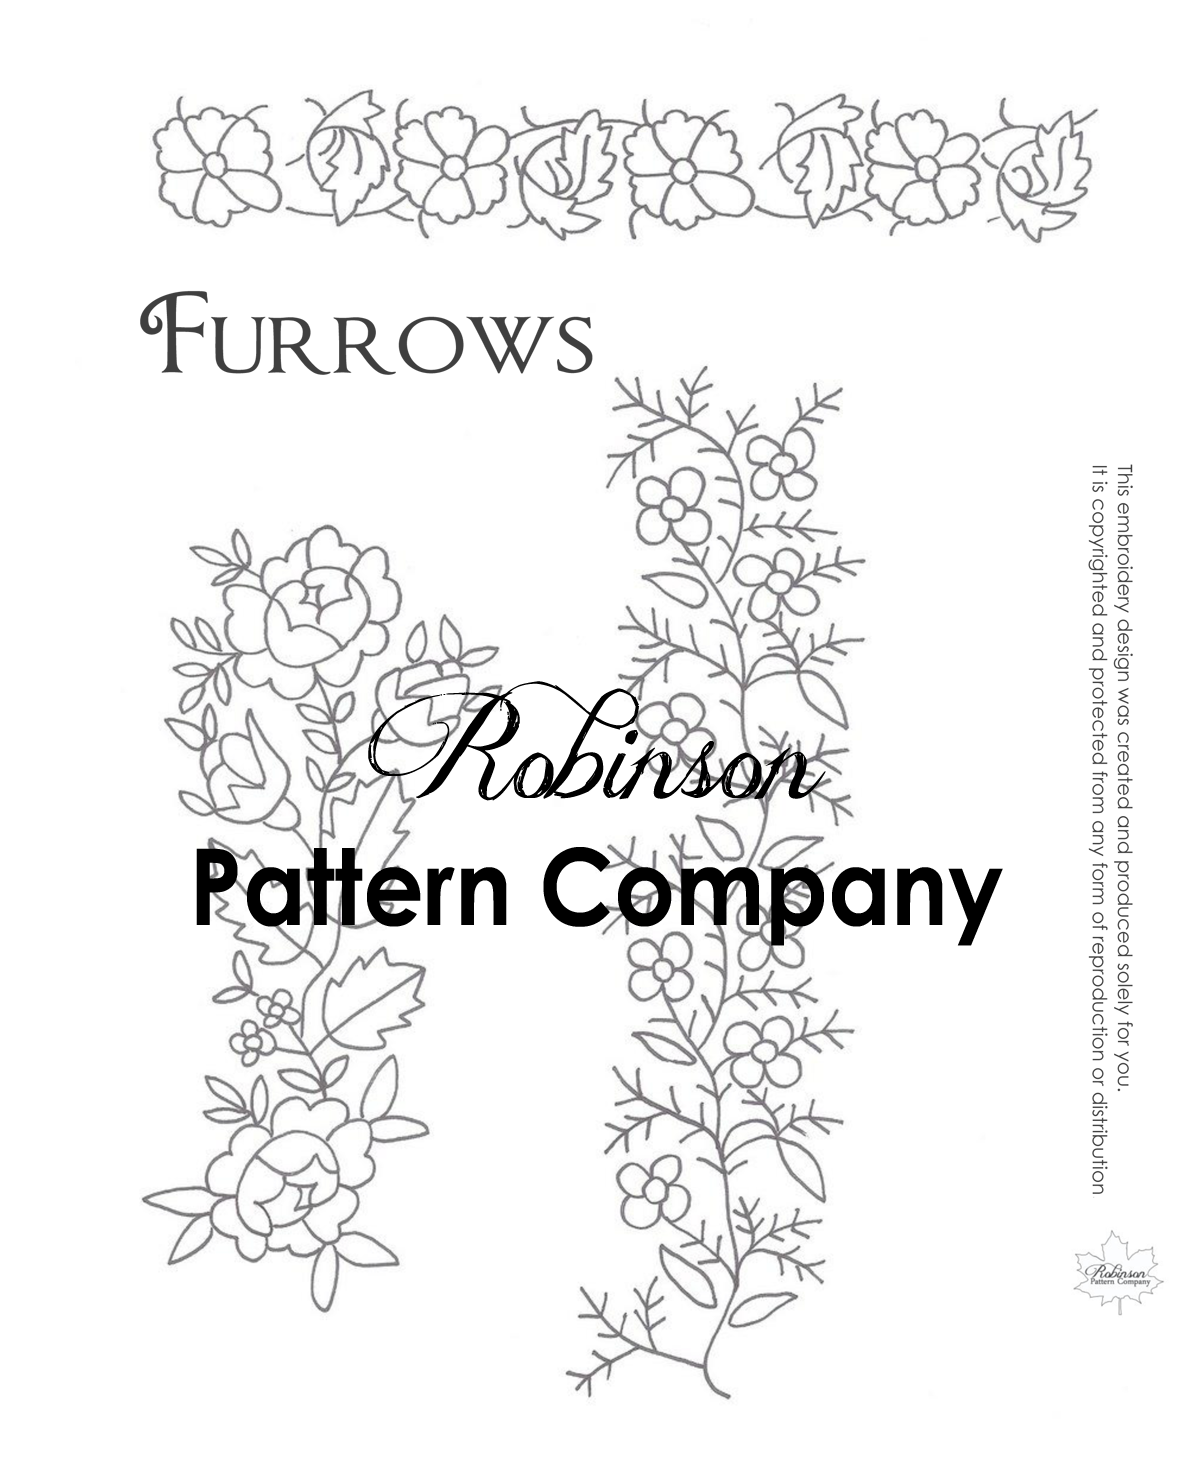 Furrows Hand Embroidery pattern